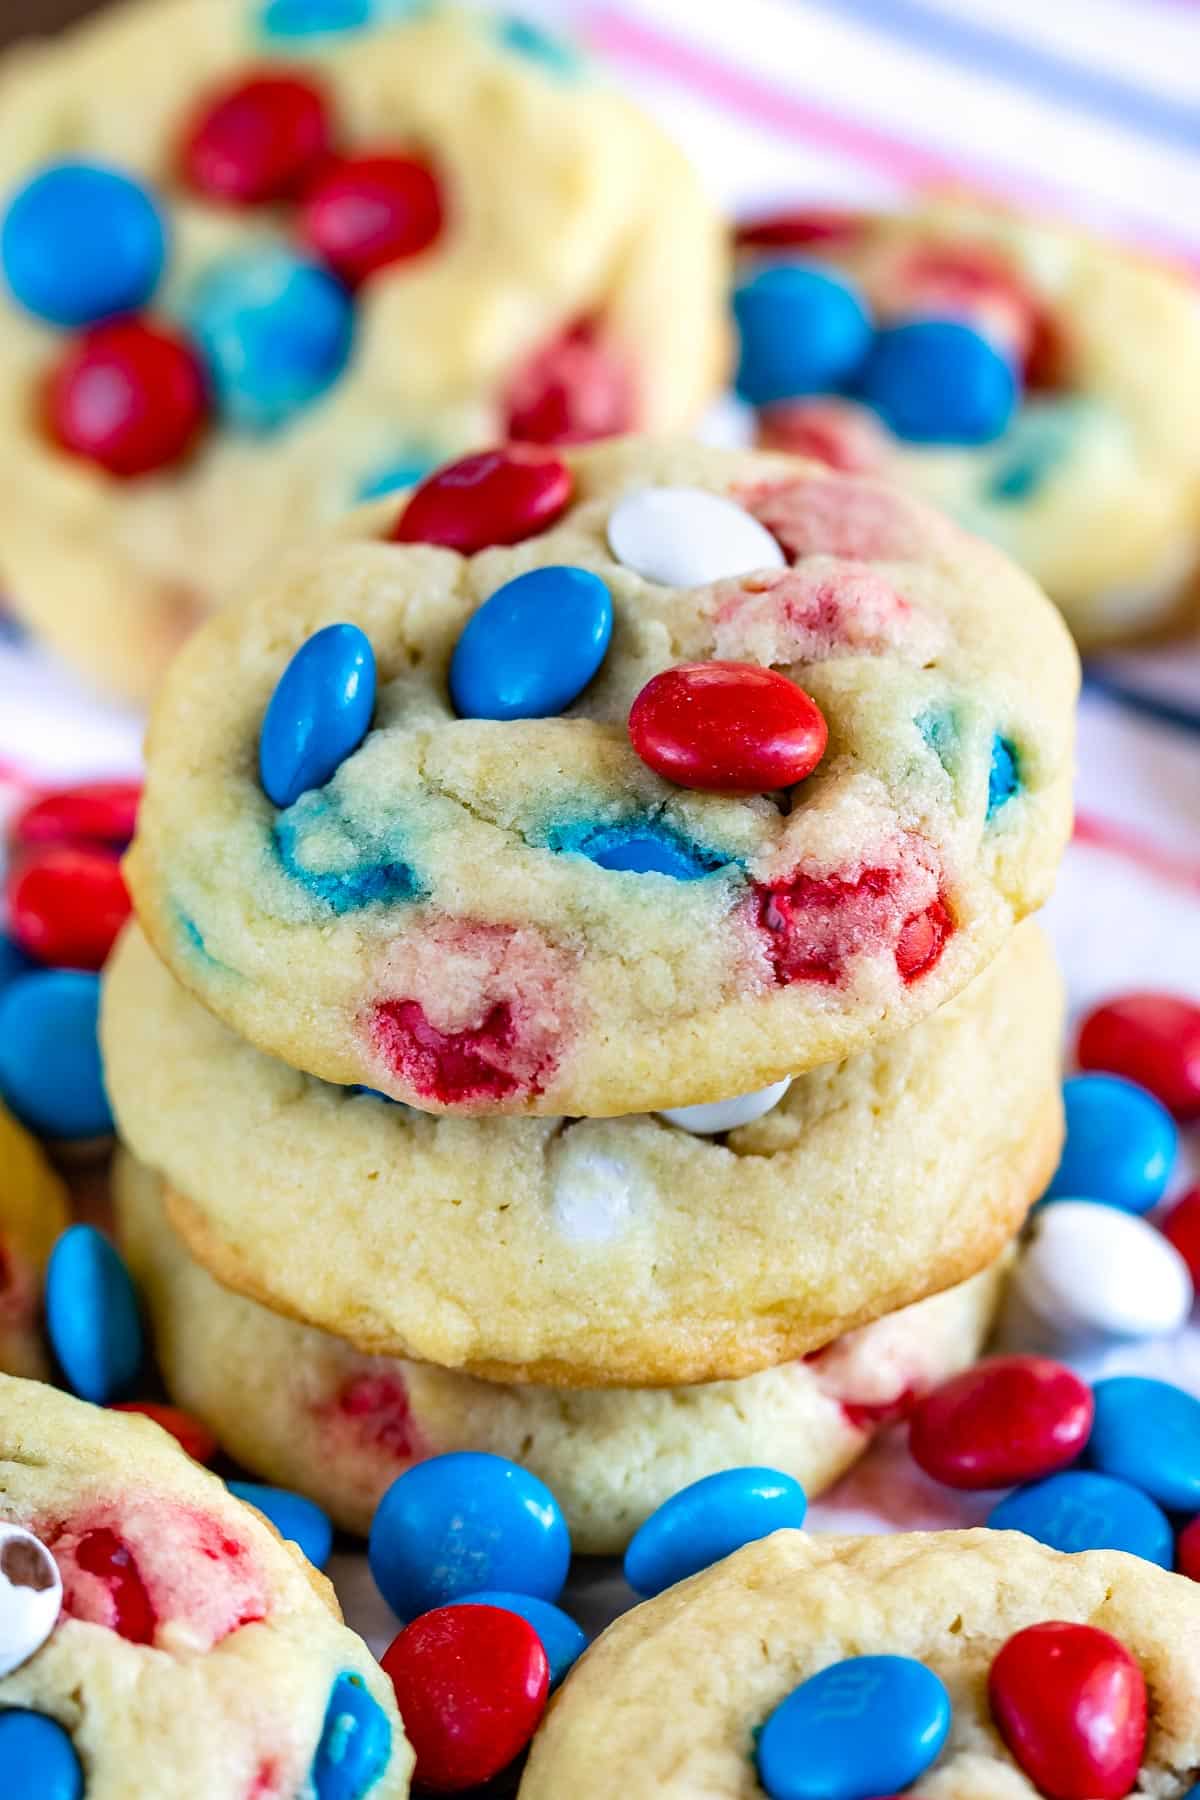 stacked cookies with red white and blue M&Ms baked in with words on the image.